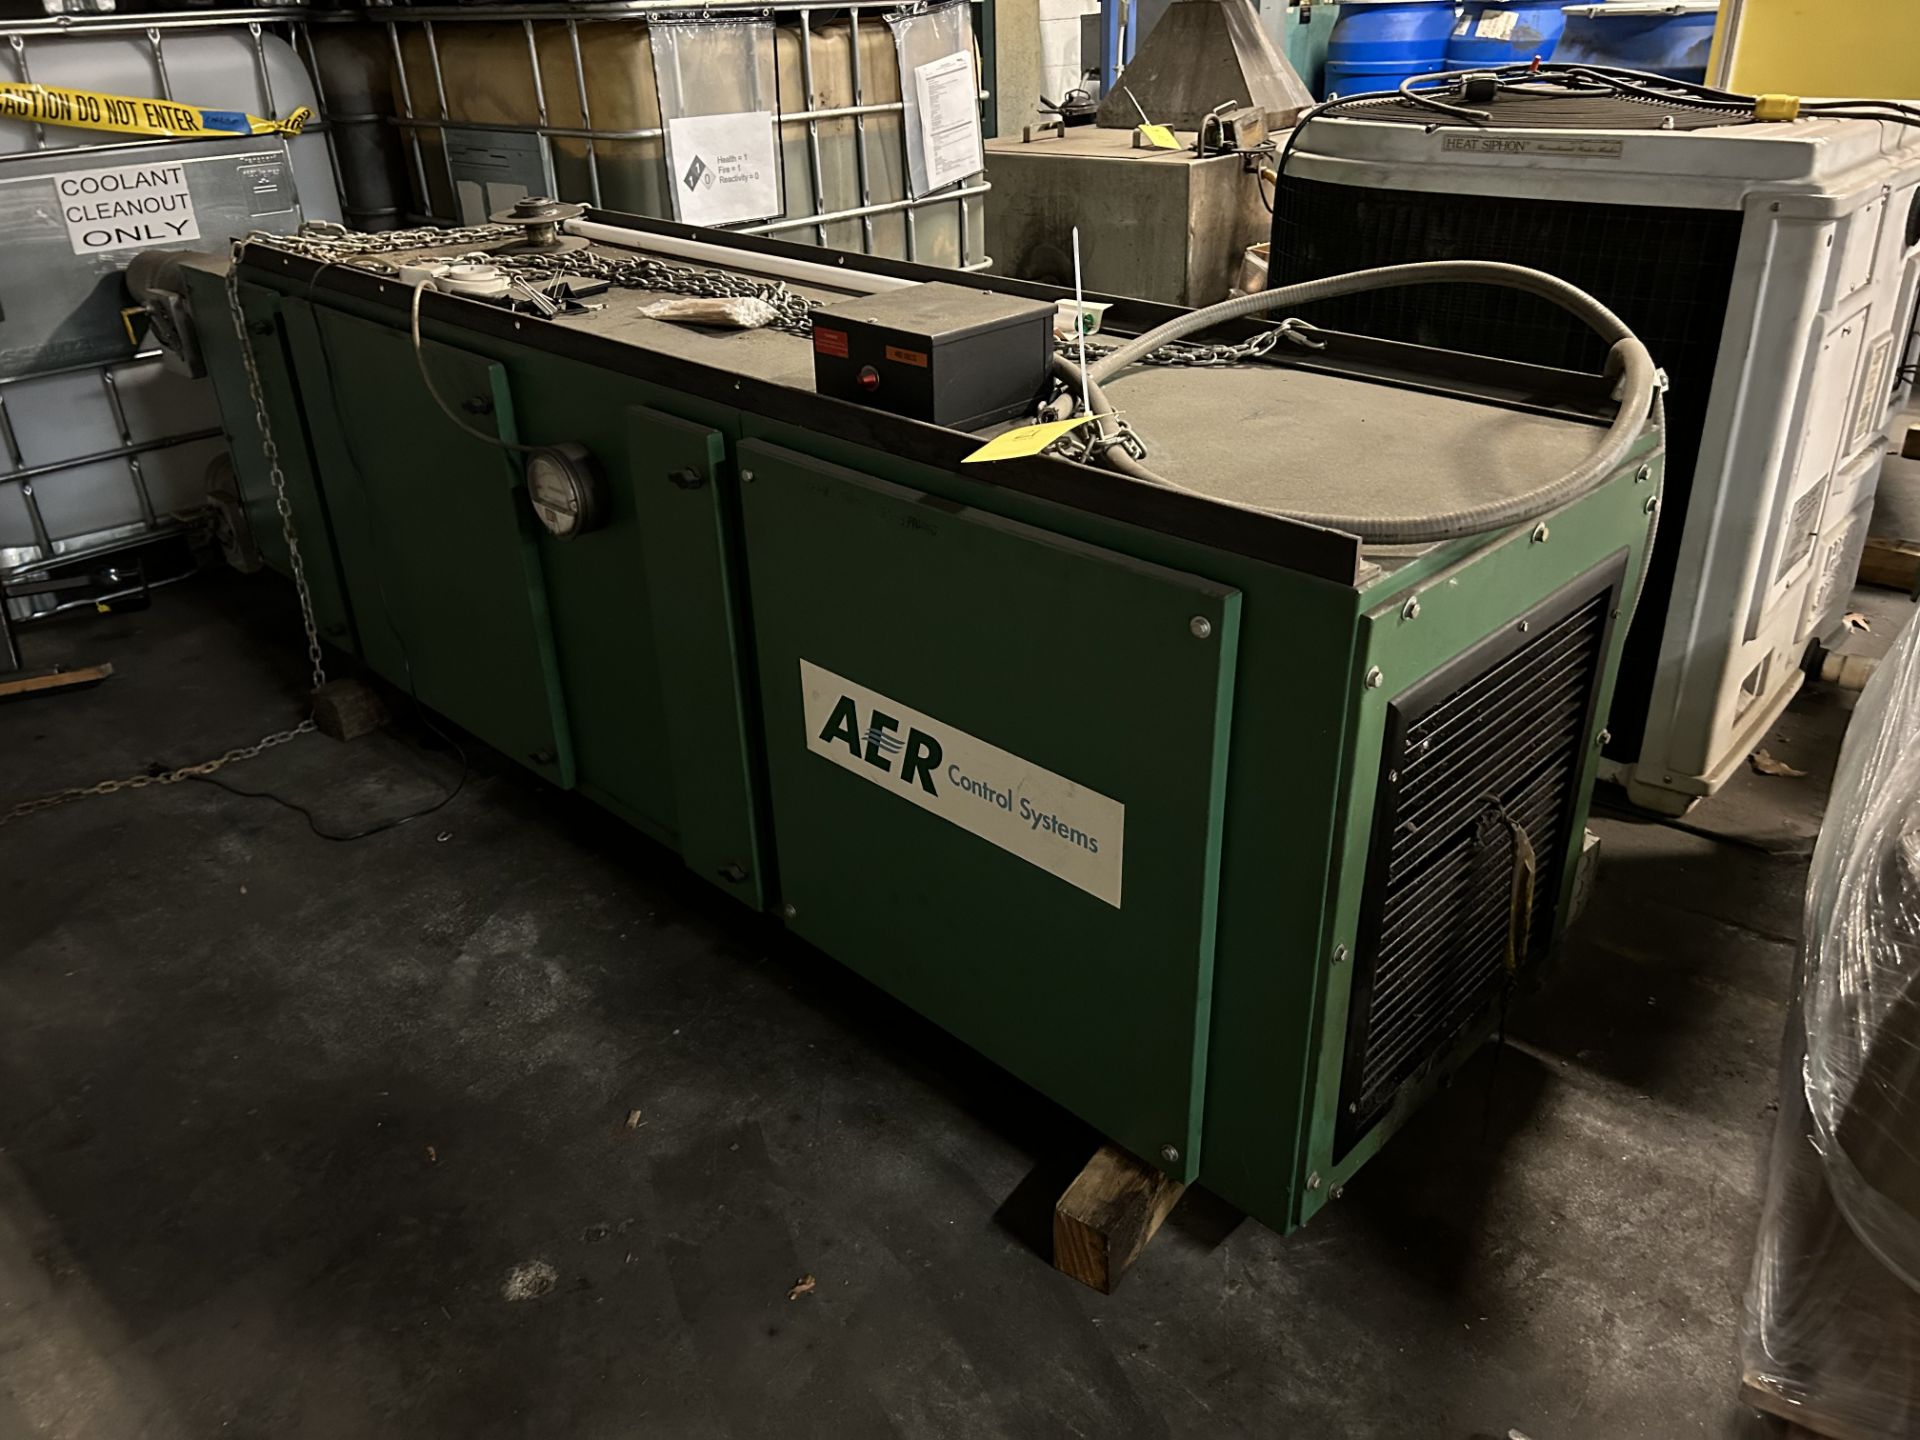 AER Control System Dust/Mist Collection System, Rigging/Loading Fee: $100 - Image 2 of 6